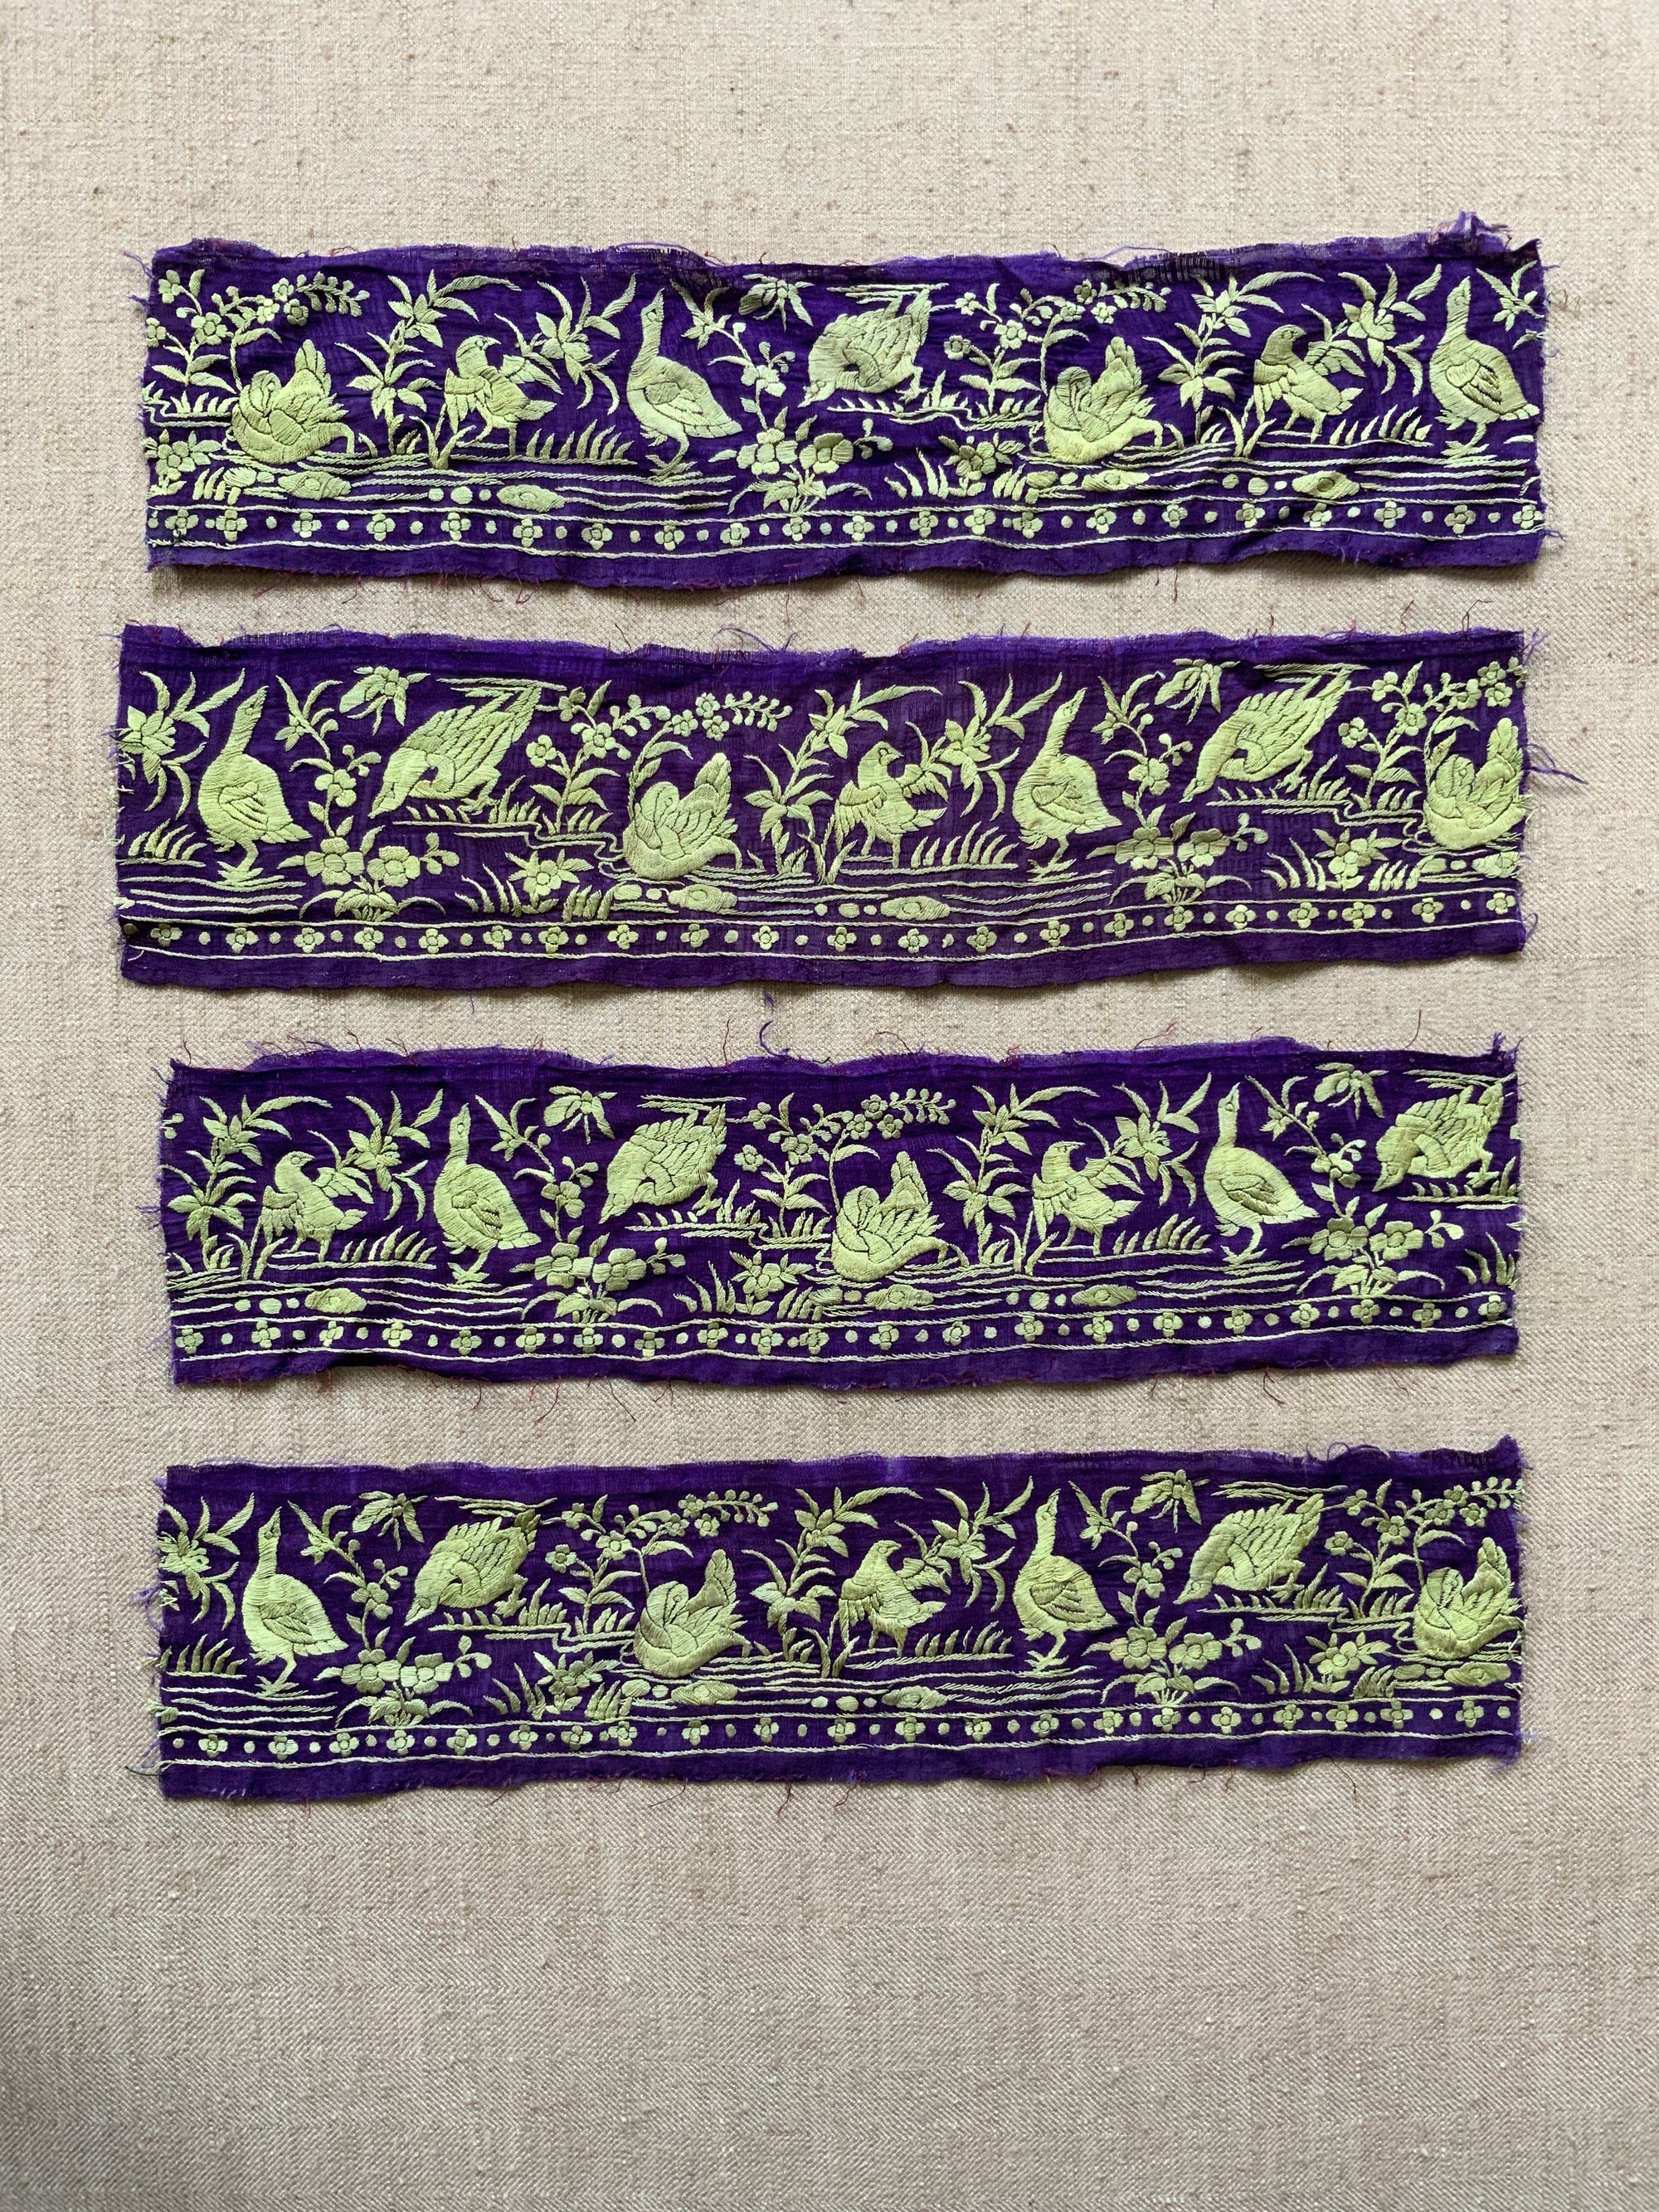 Surat or Chinese Parsi work embroidered fragments (11 x 48cm) [4]